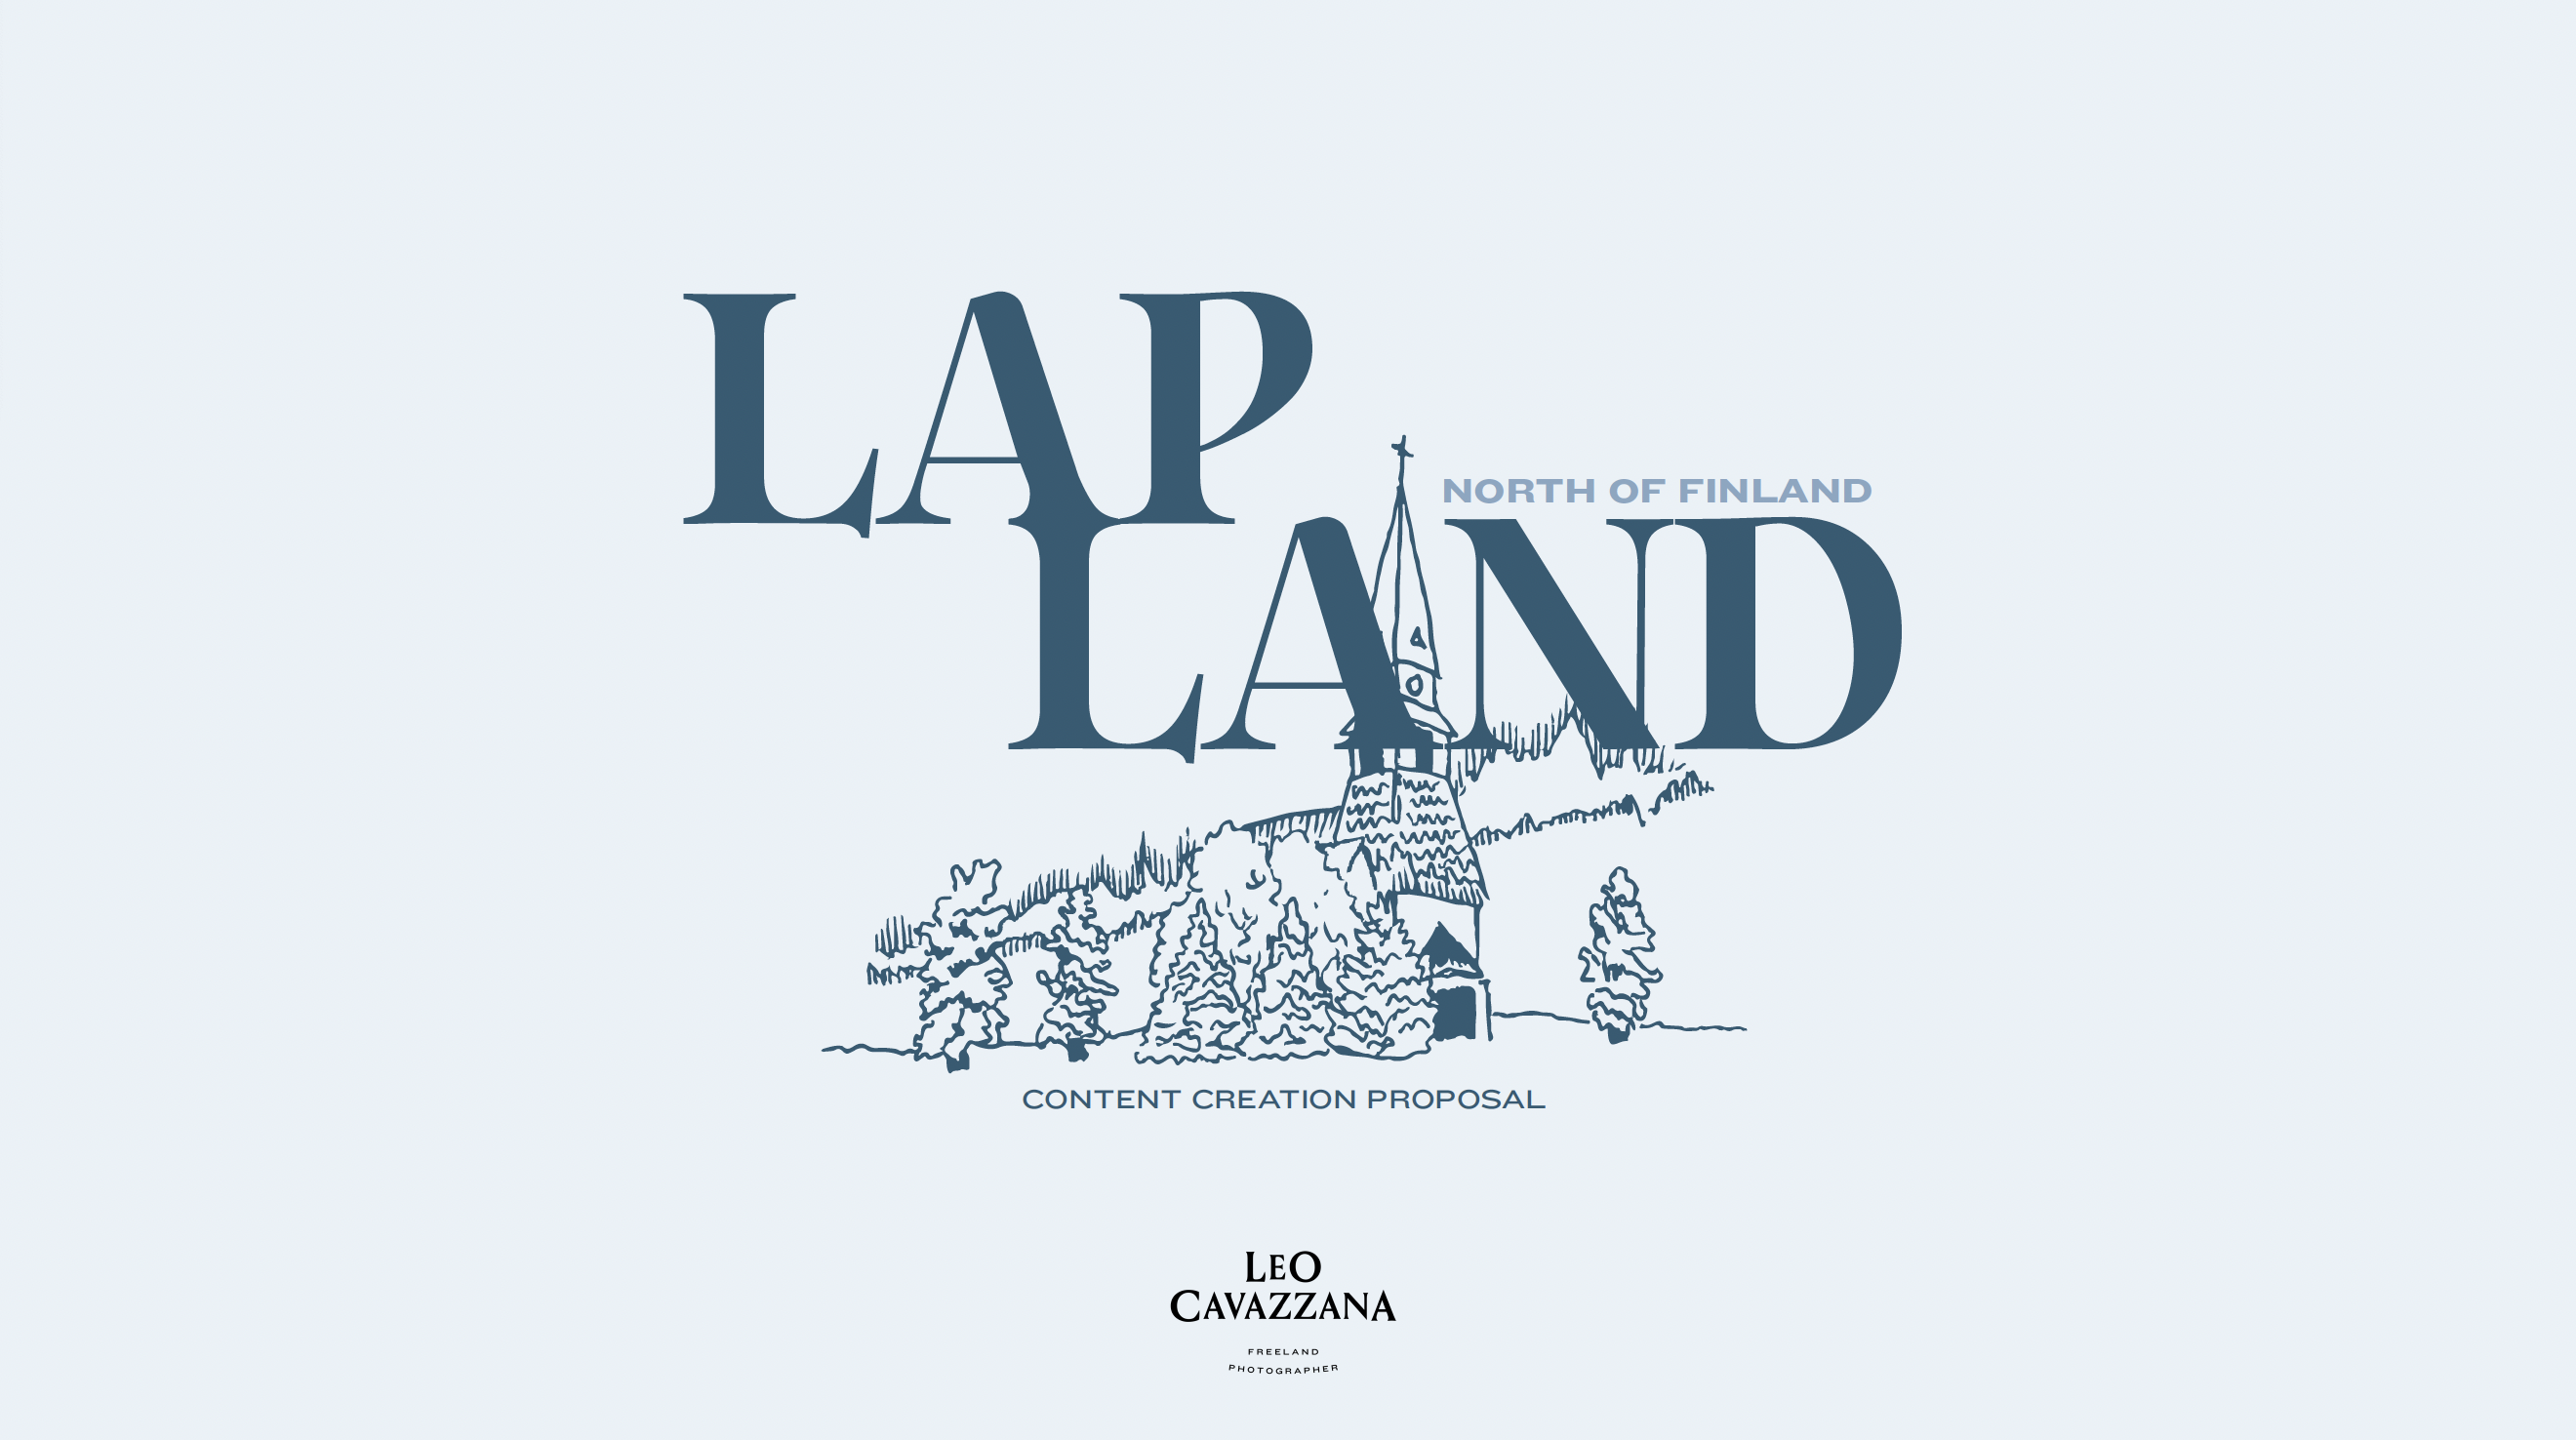 The logo for lap land.